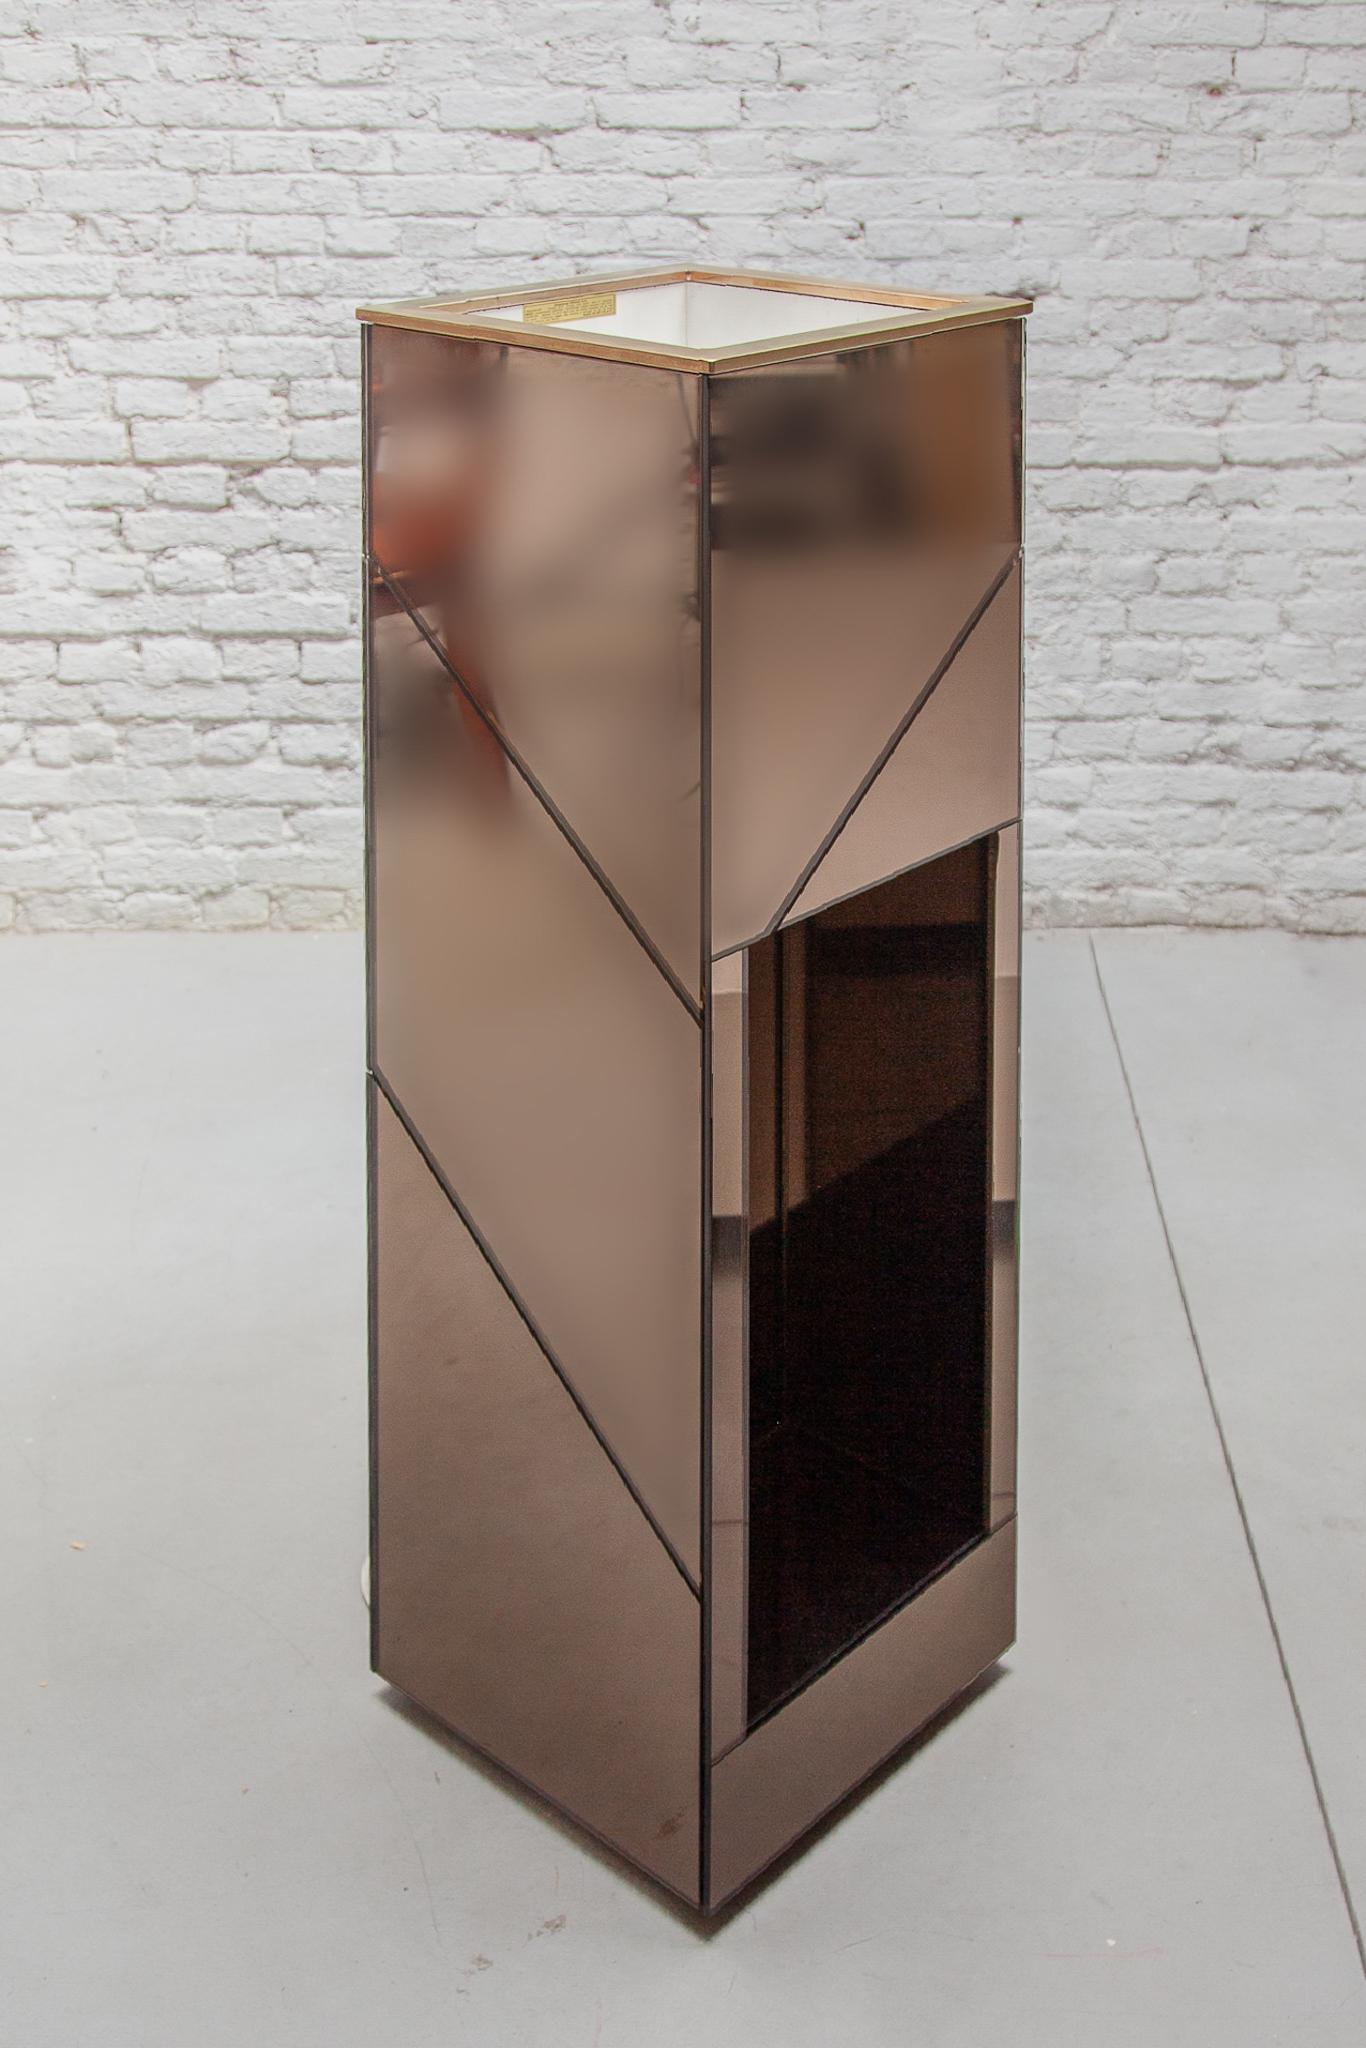 Hollywood Regency Smoked Mirrored Planter, Floor Lamp 1970s designed by Belgo chrome For Sale